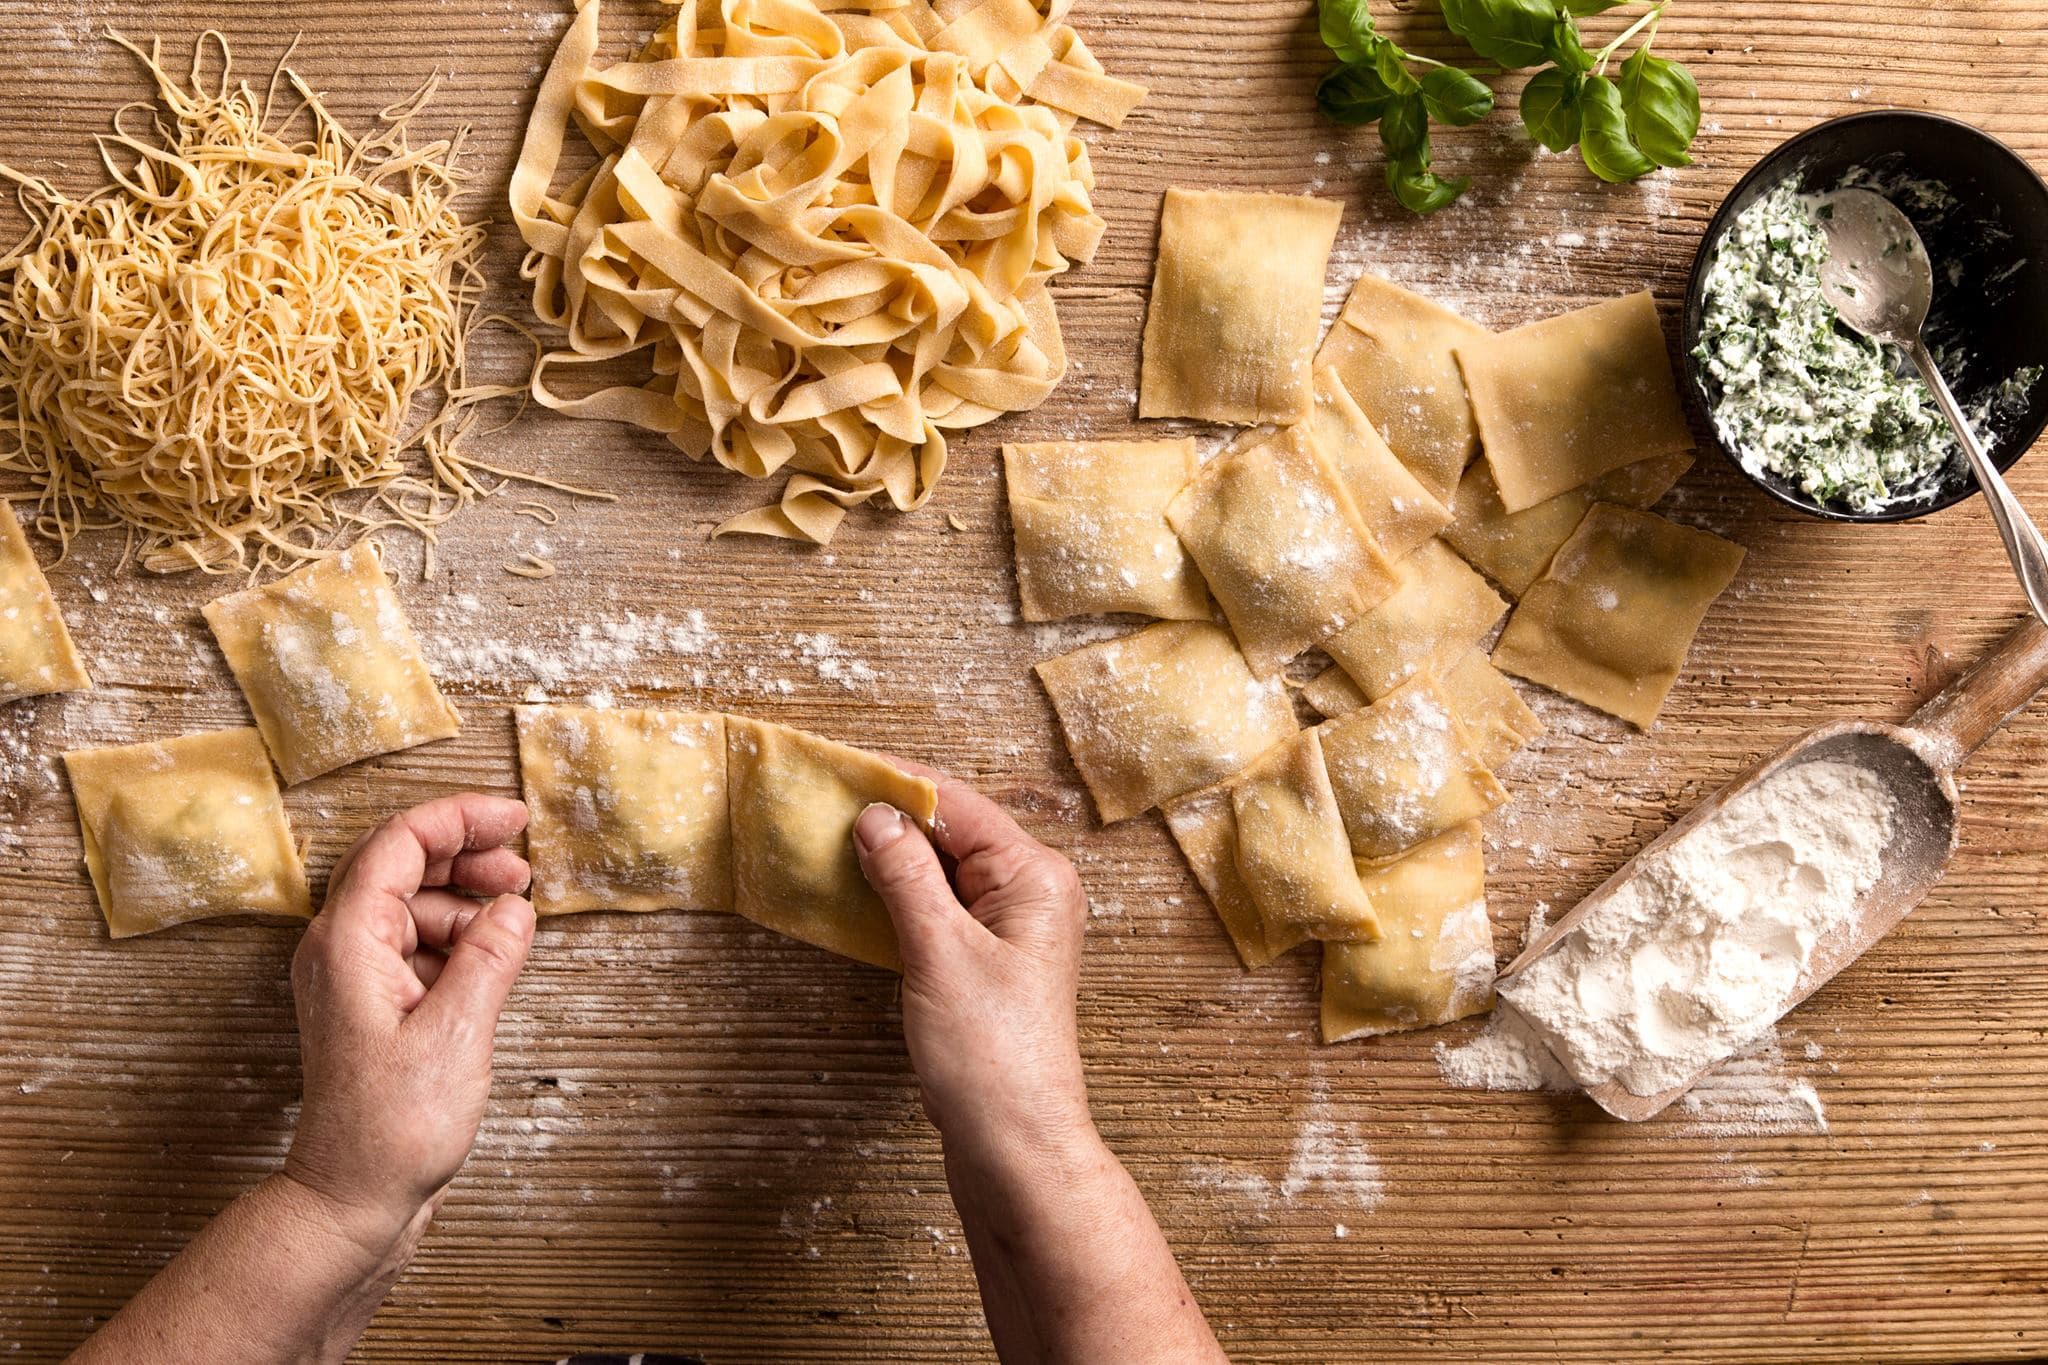 Craving pasta? These places serve up delicious homemade renditions